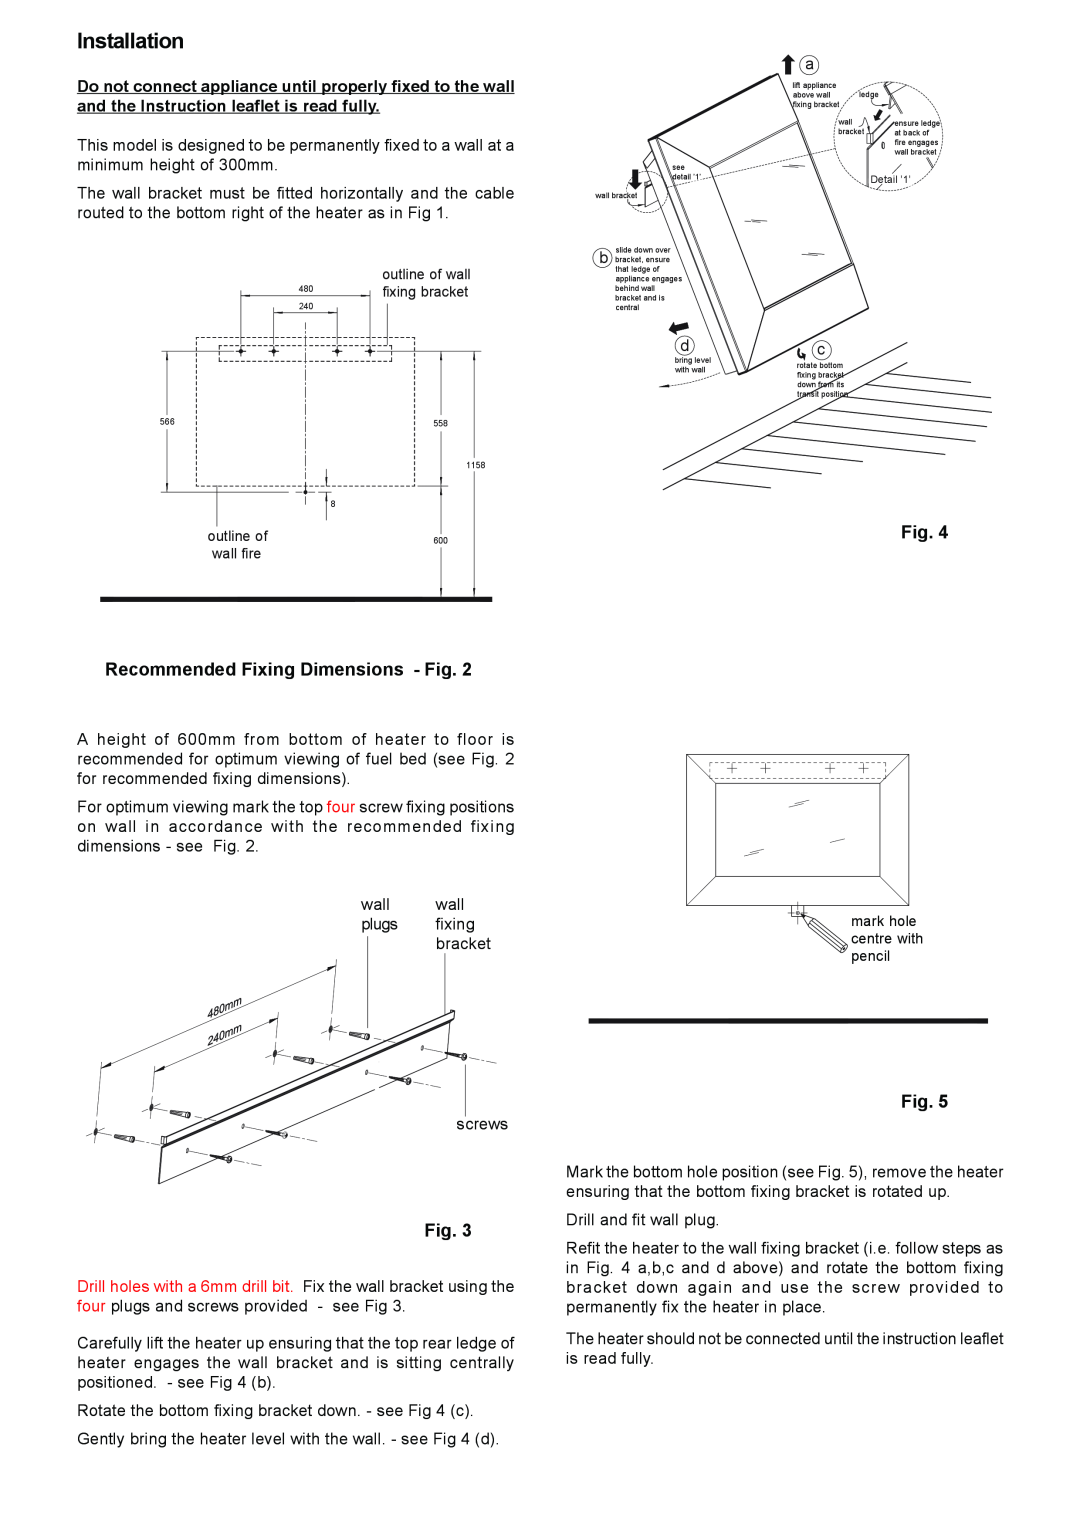 Faber SP4 dimensions Installation, Recommended Fixing Dimensions - Fig 